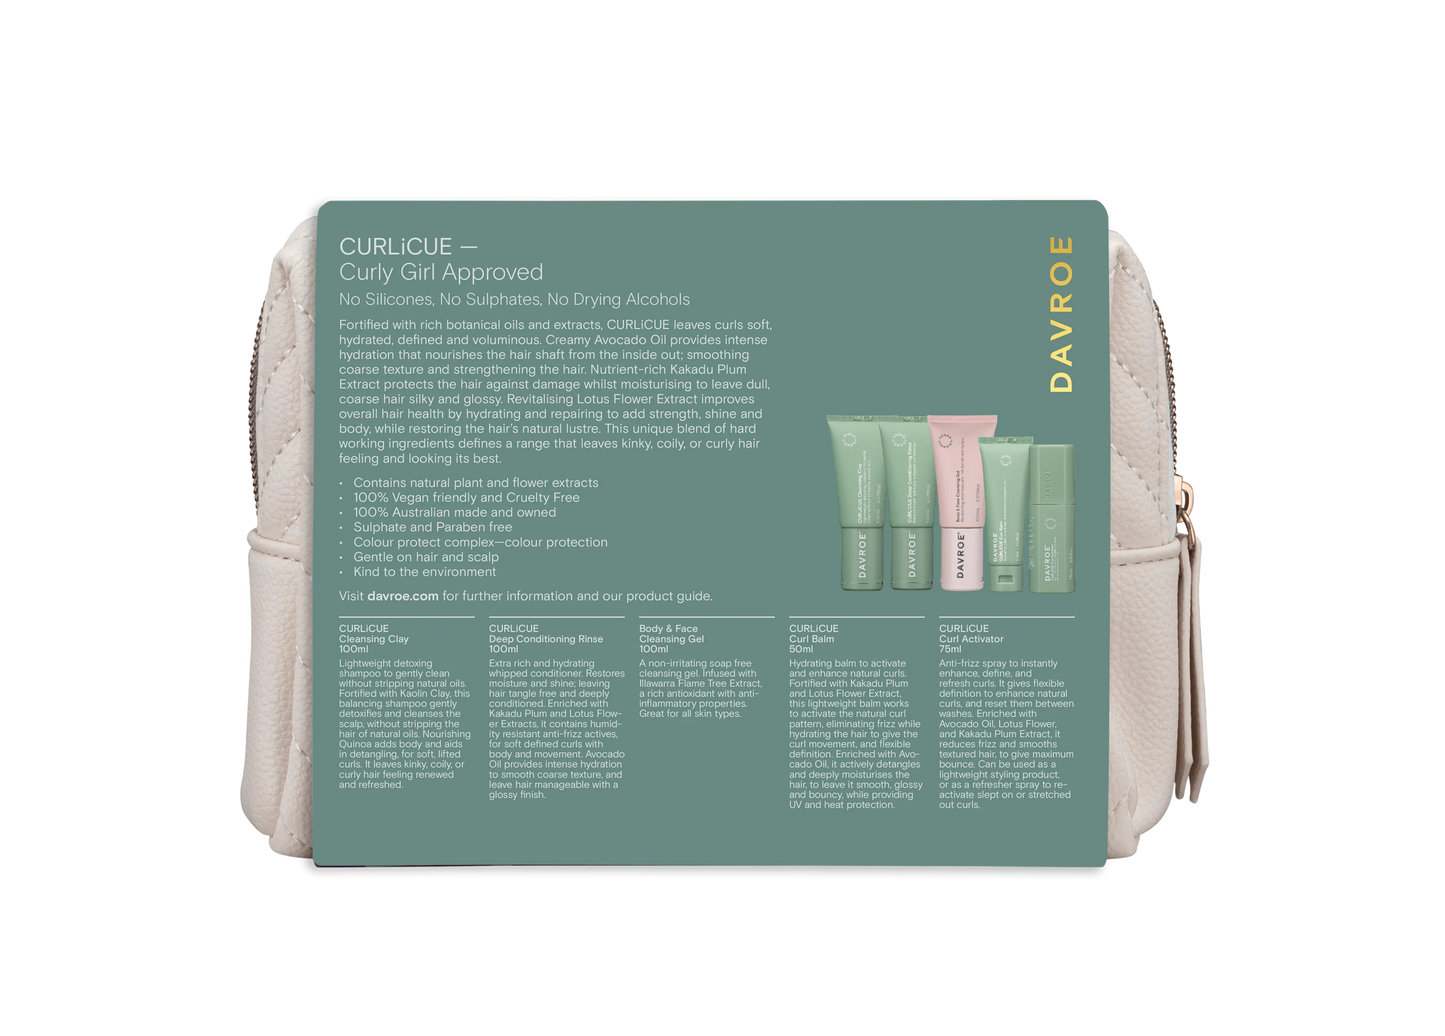 CURLiCUE Travel Size Pack